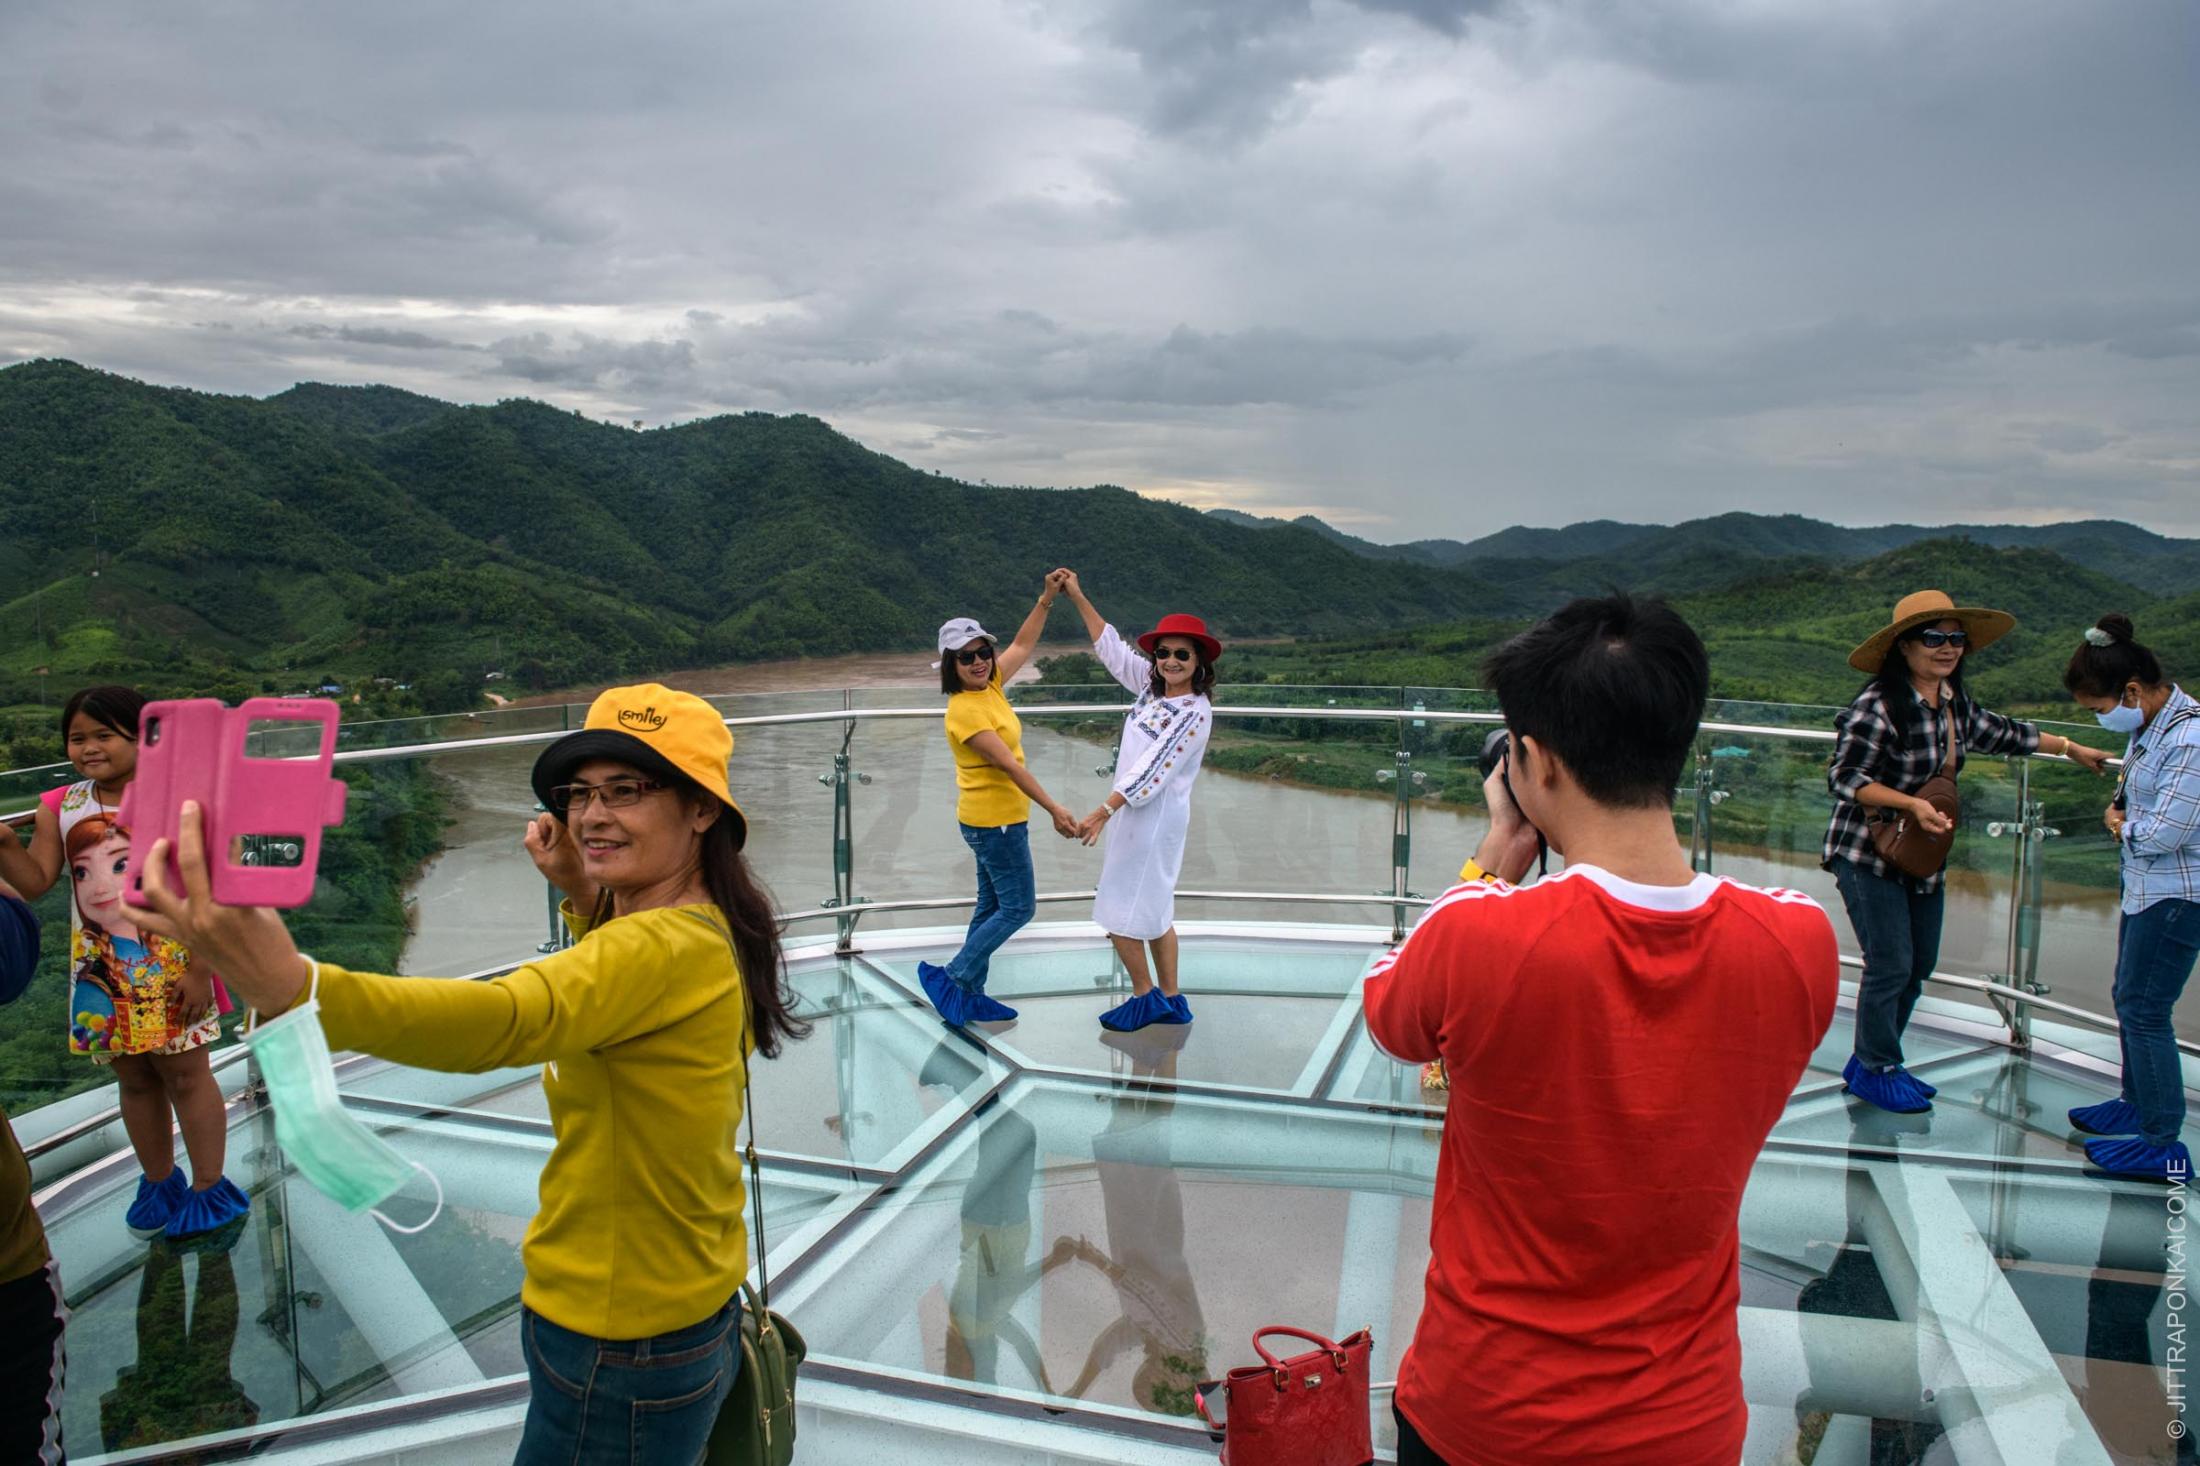 Mekong in Peril - The new glass skywalk of Chiang Khan province is located...